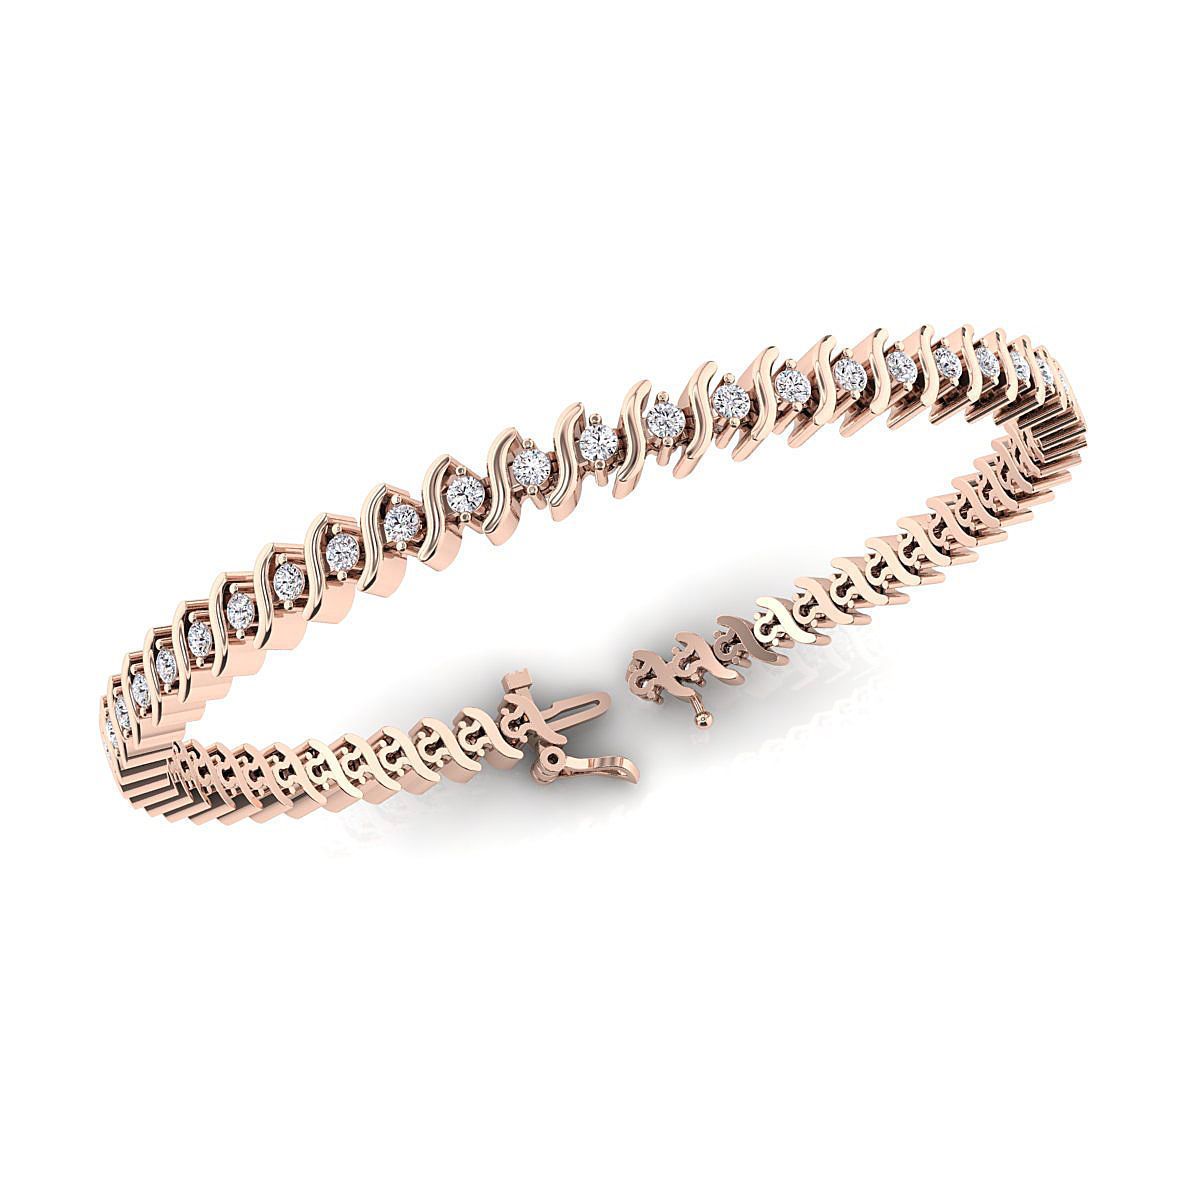 Luxury Womens Bridesmaid Jewelry Gift: VVS Round Cut Moissanite Bracelet In  14k And 14K Solid Gold From Dhhm998, $136.65 | DHgate.Com